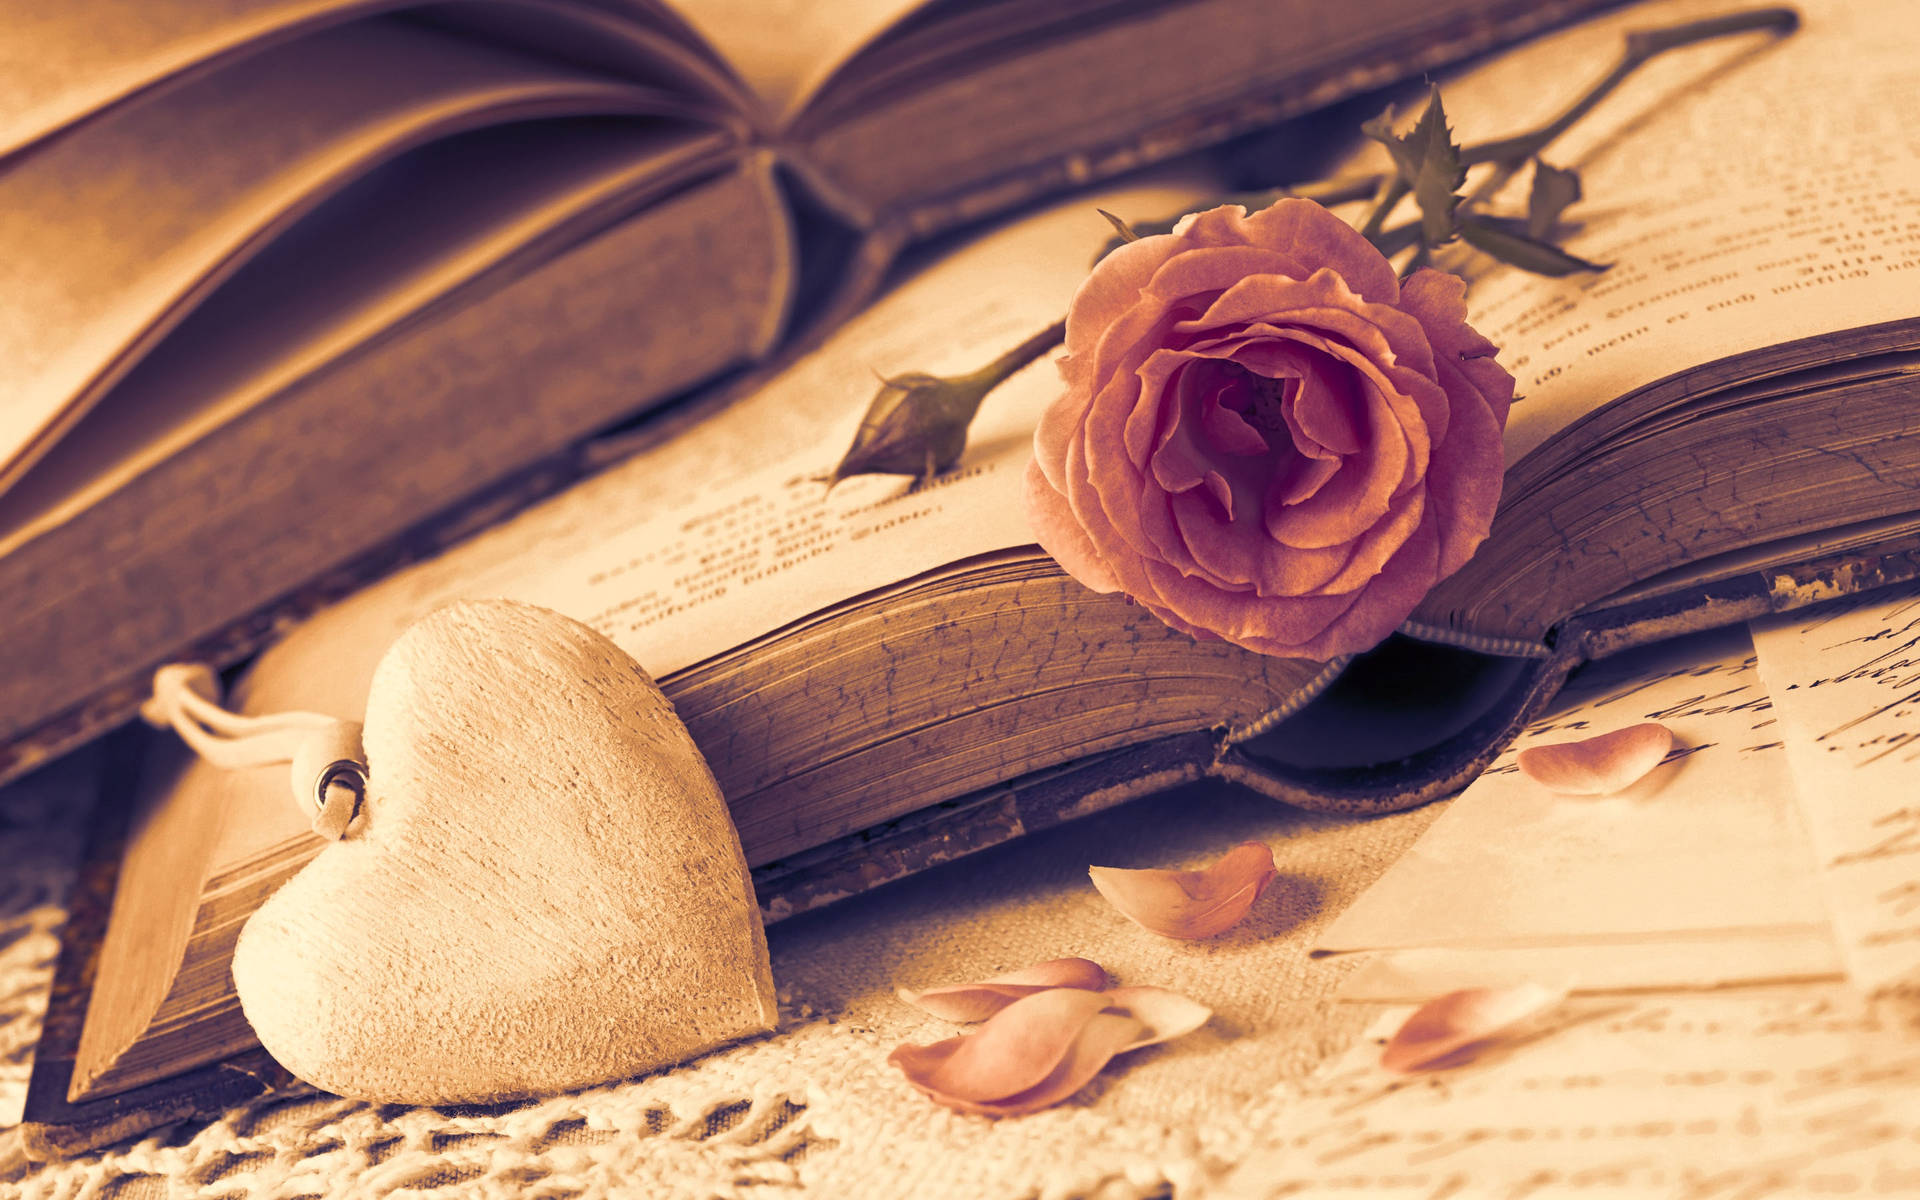 Romantic Rose In Between Pages Background